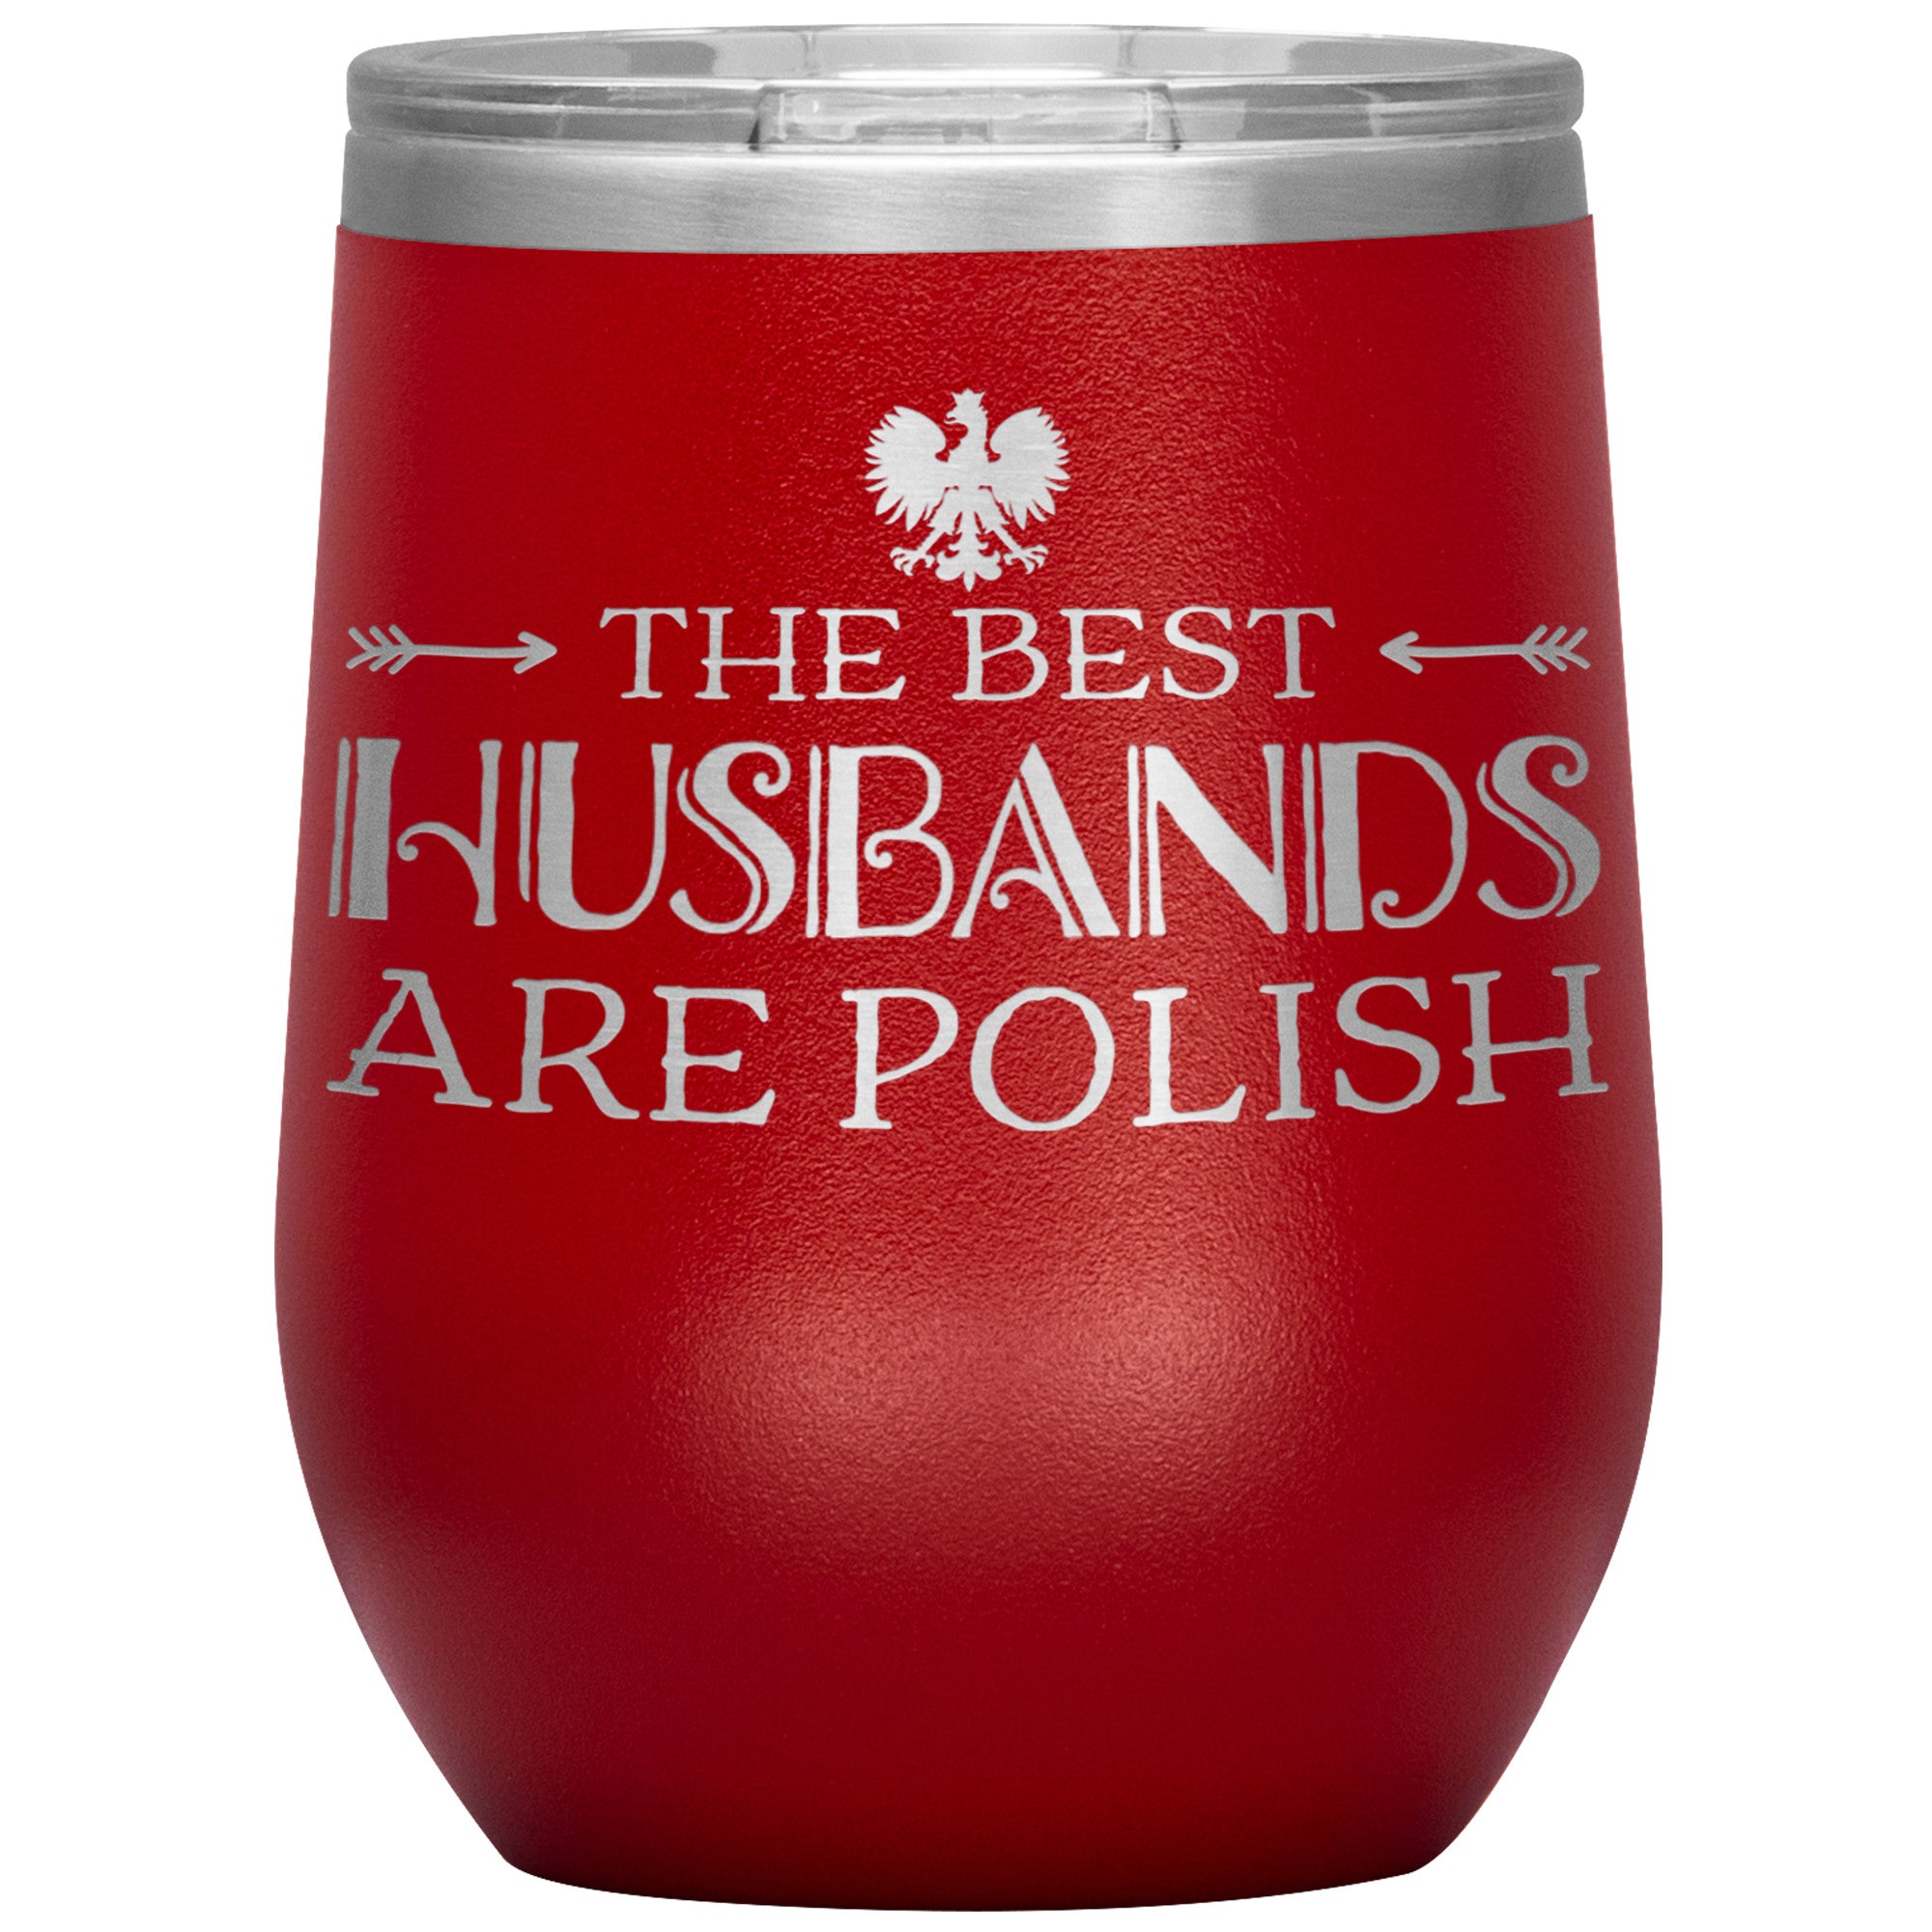 The Best Husbands Are Polish Insulated Wine Tumbler Tumblers teelaunch Red  